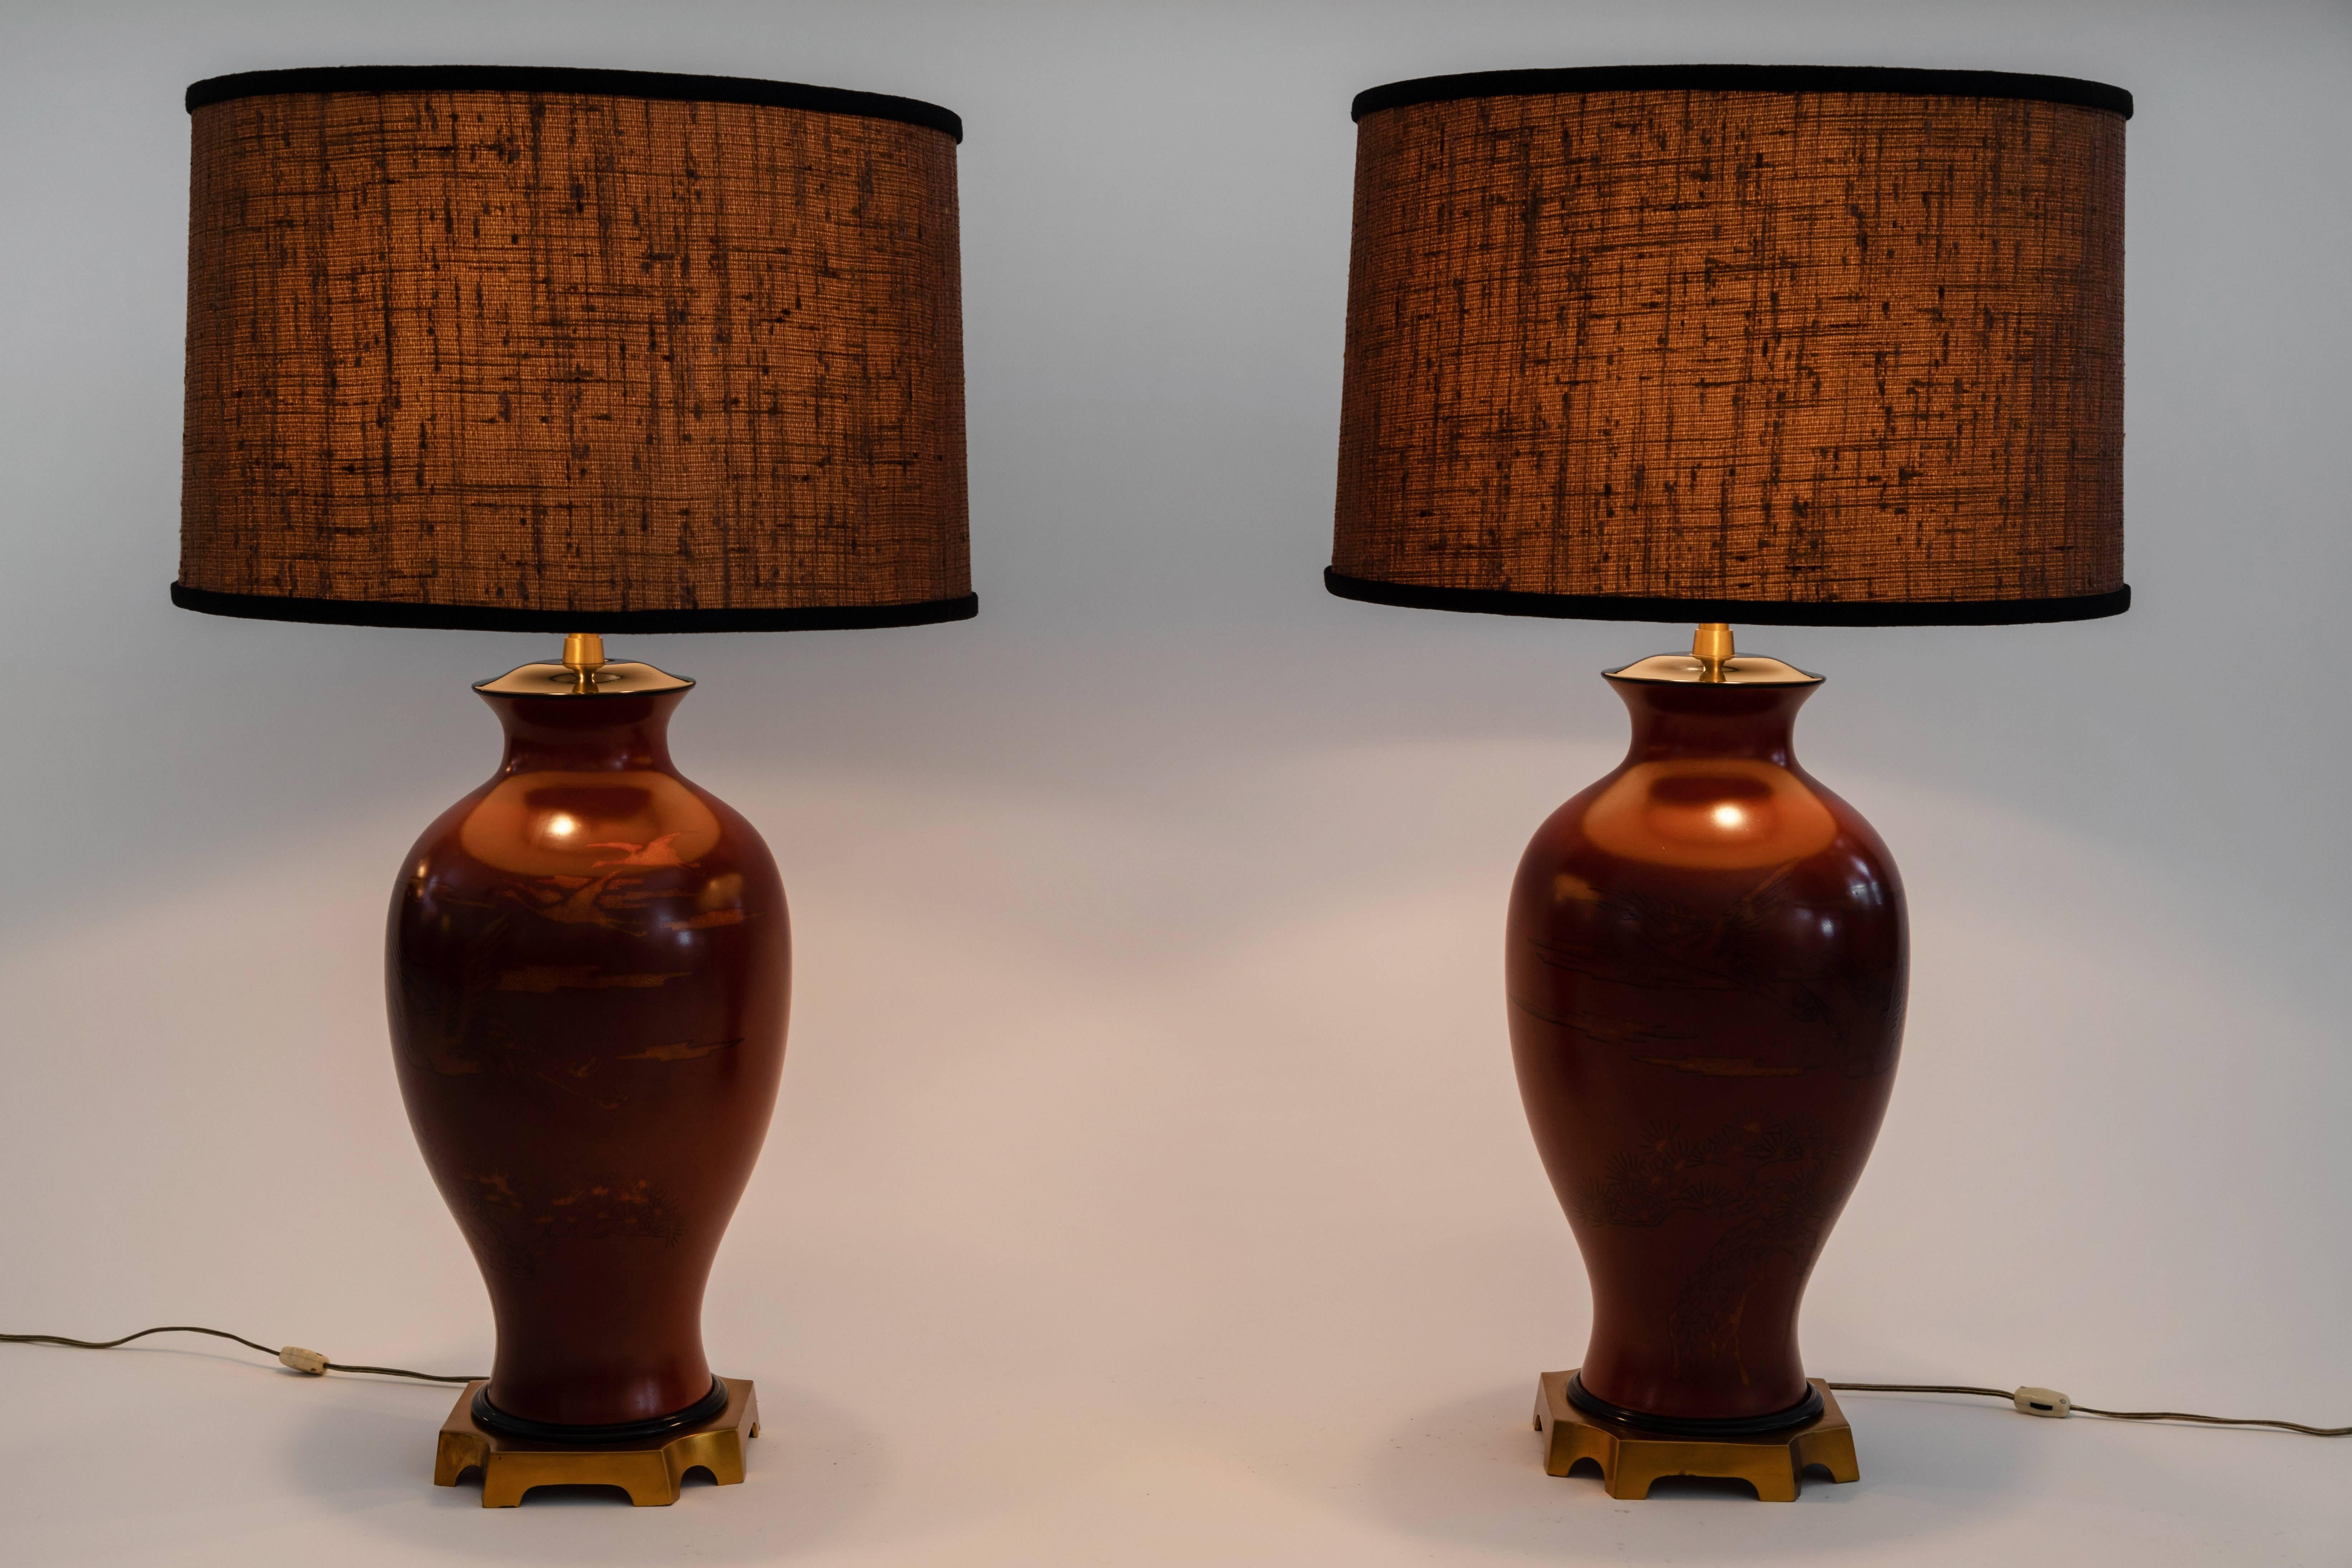 Pair of Japanese or Chinoiserie Style Urn Table Lamps by Marbro Lamp Company 3